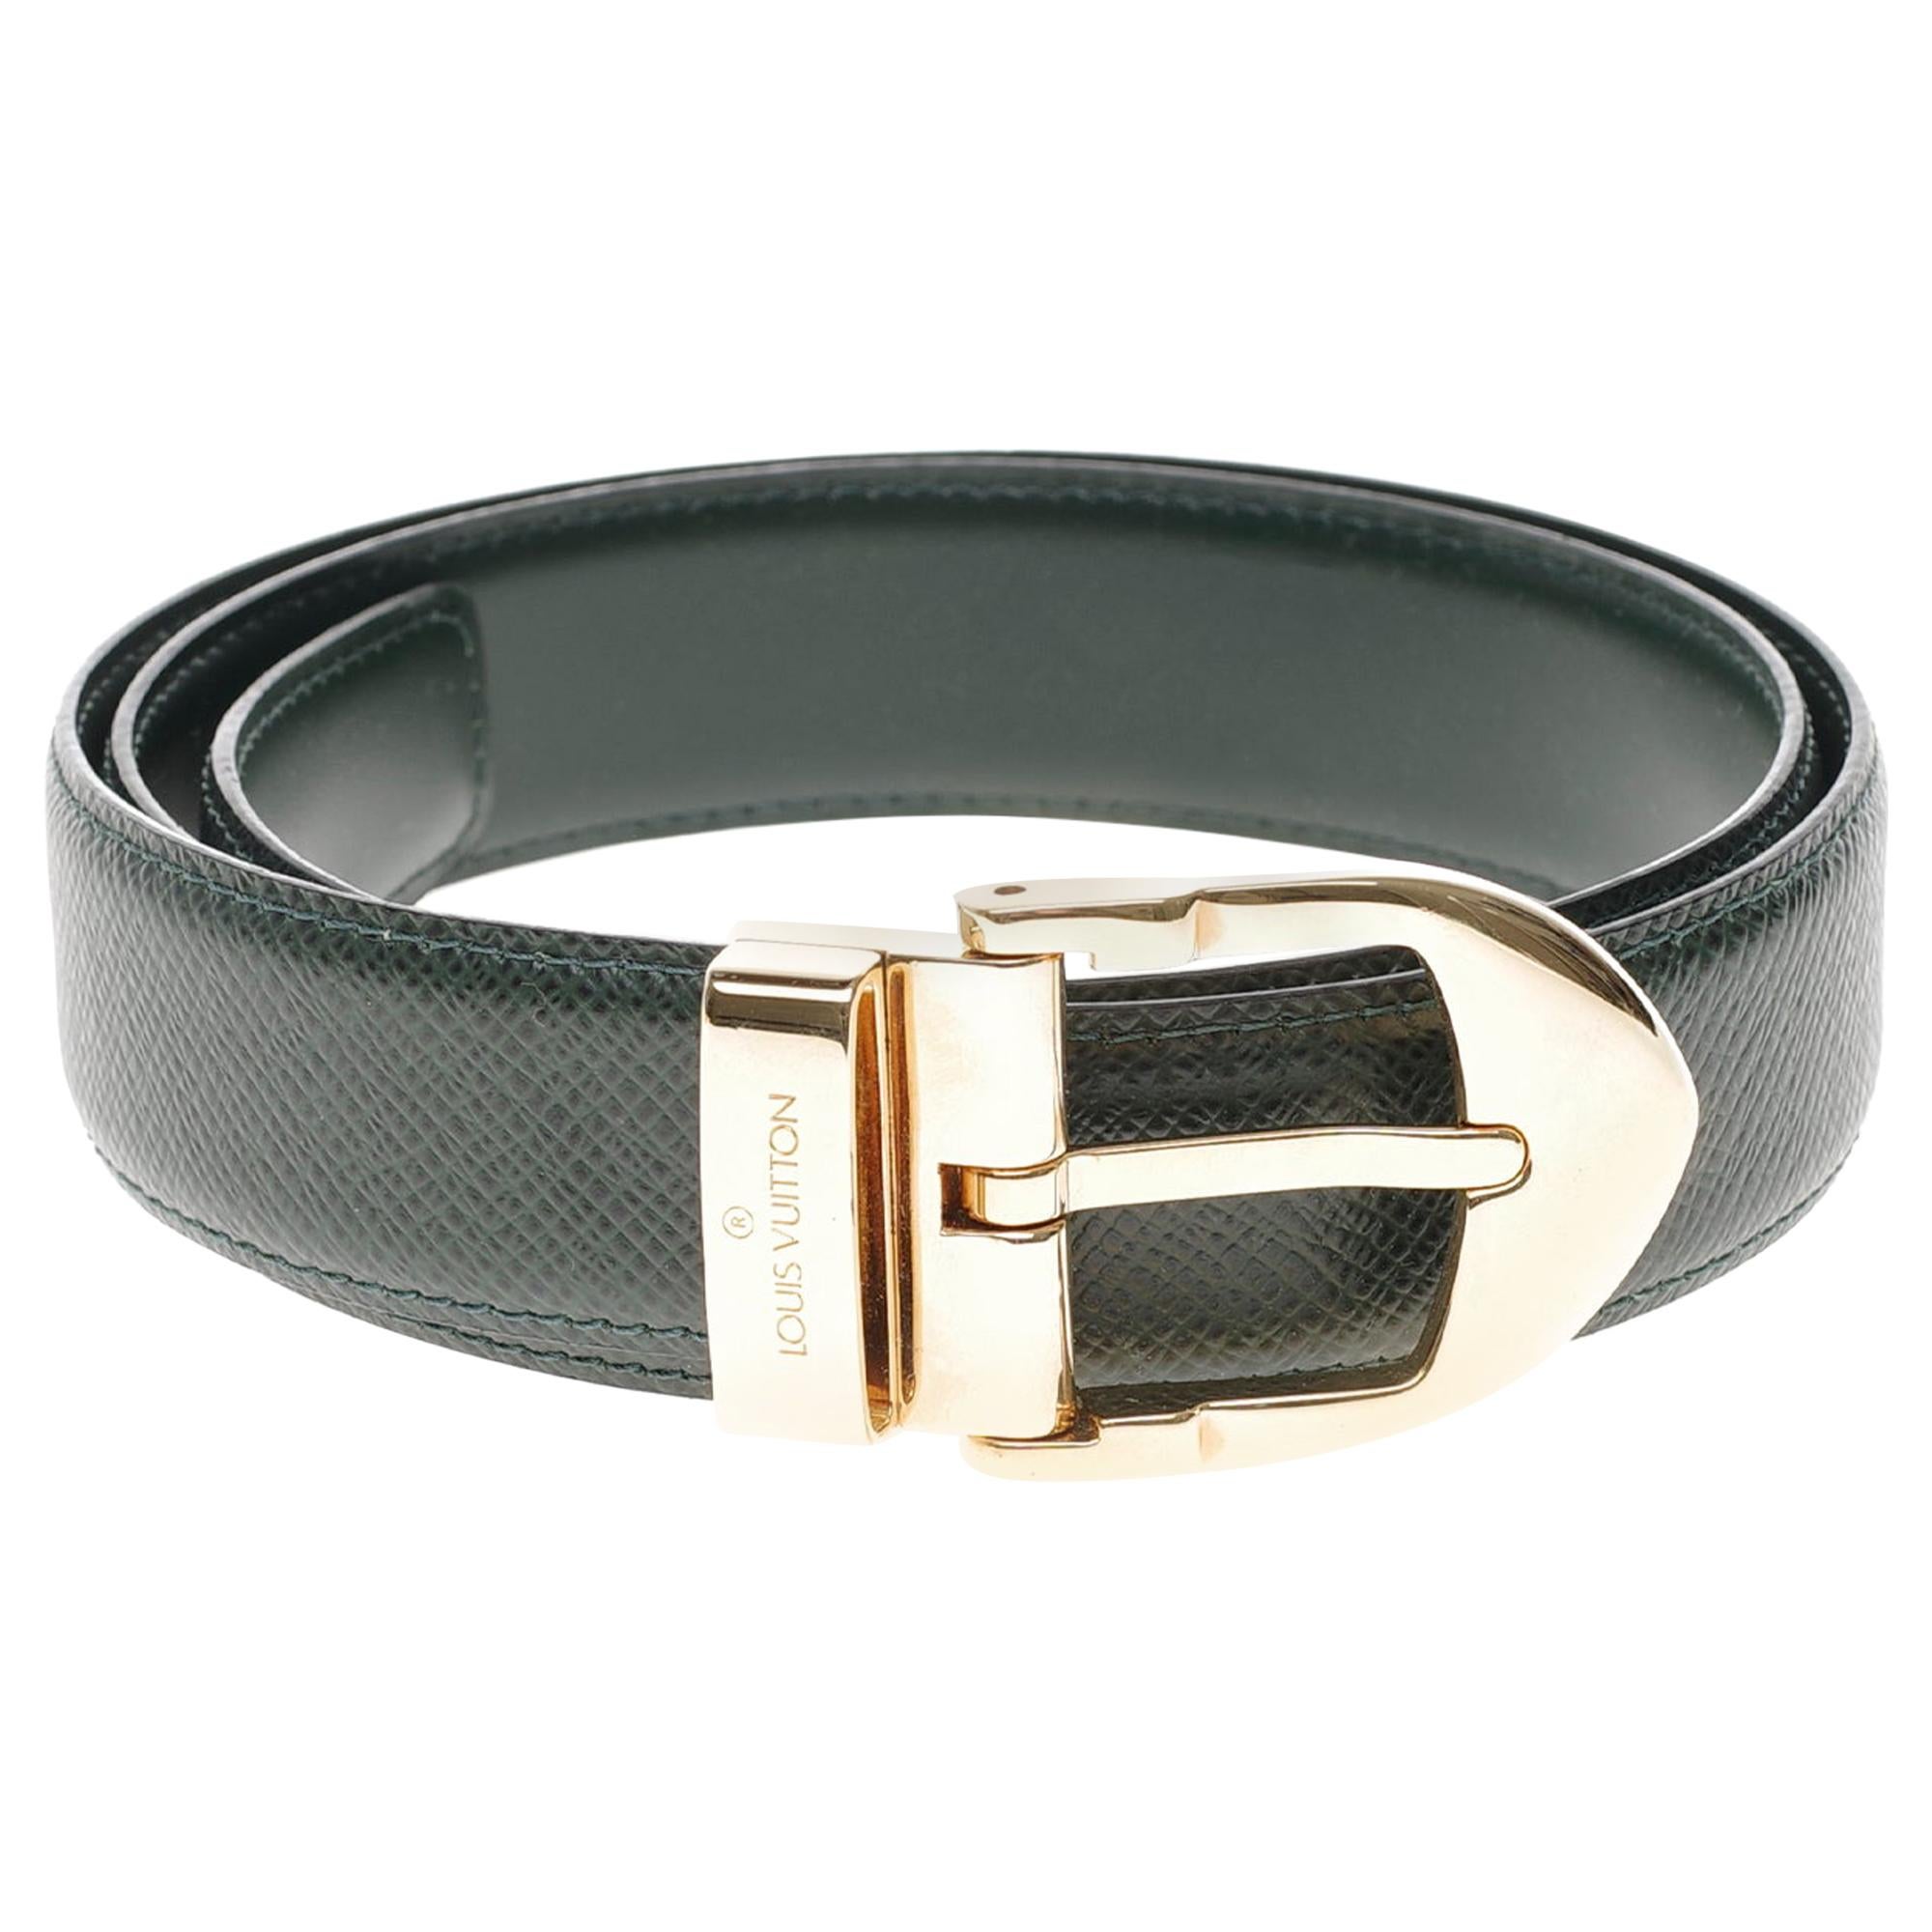 Stunning Louis Vuitton belt in green Taïga leather and golden buckle